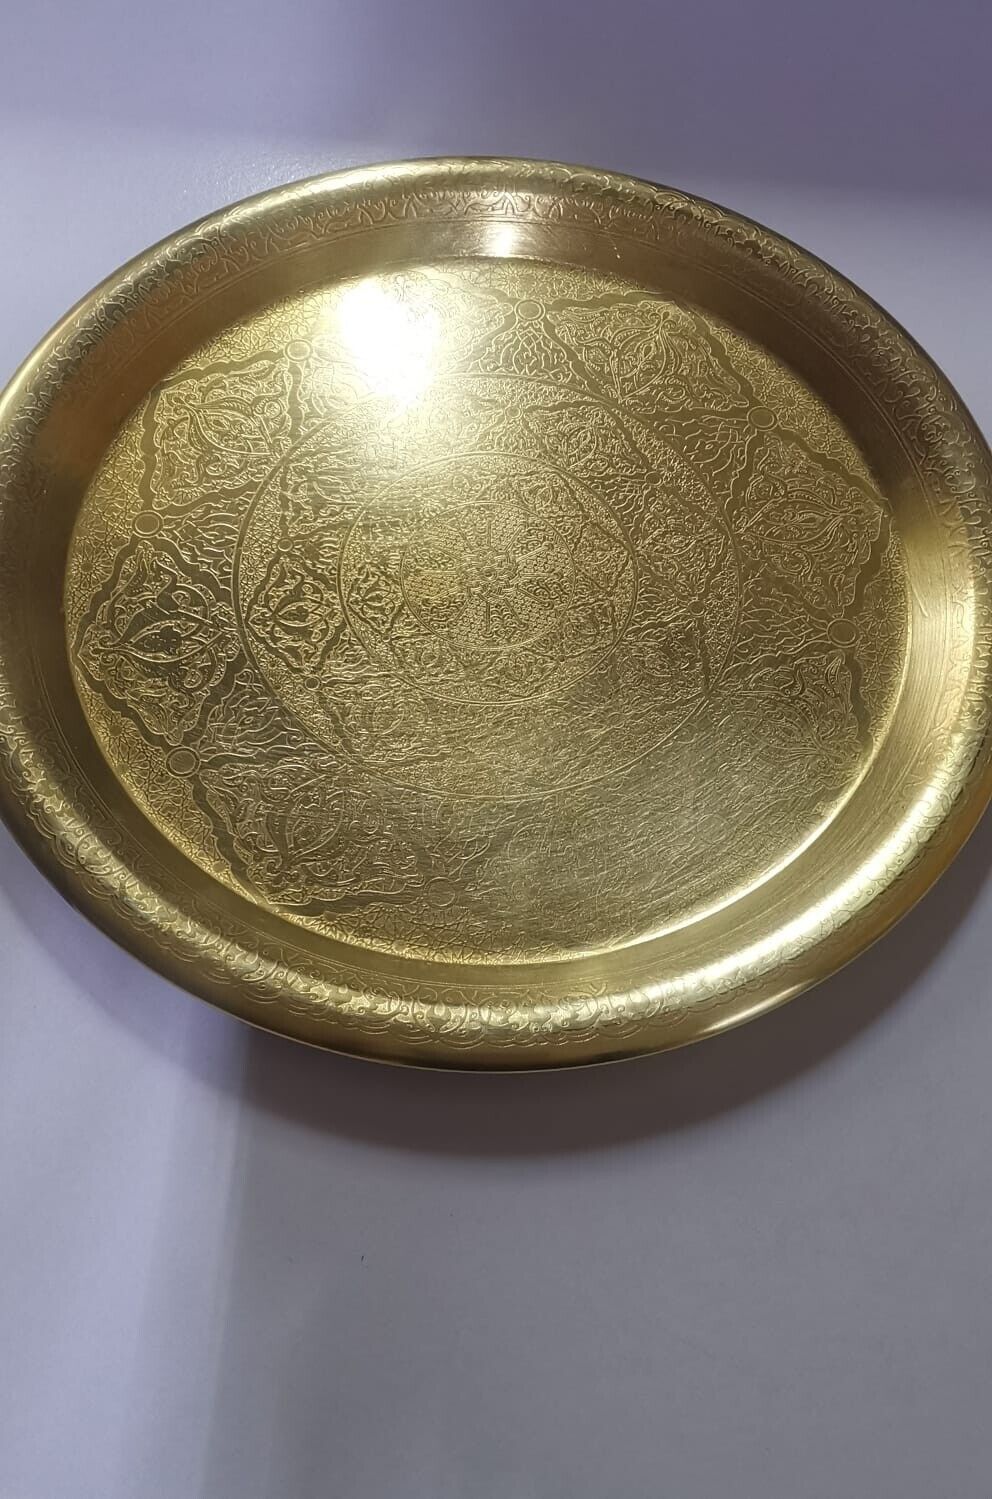 Beautifully Hand Engraved Golden Copper Plate Size 33 cm 12.99Inches Middle East